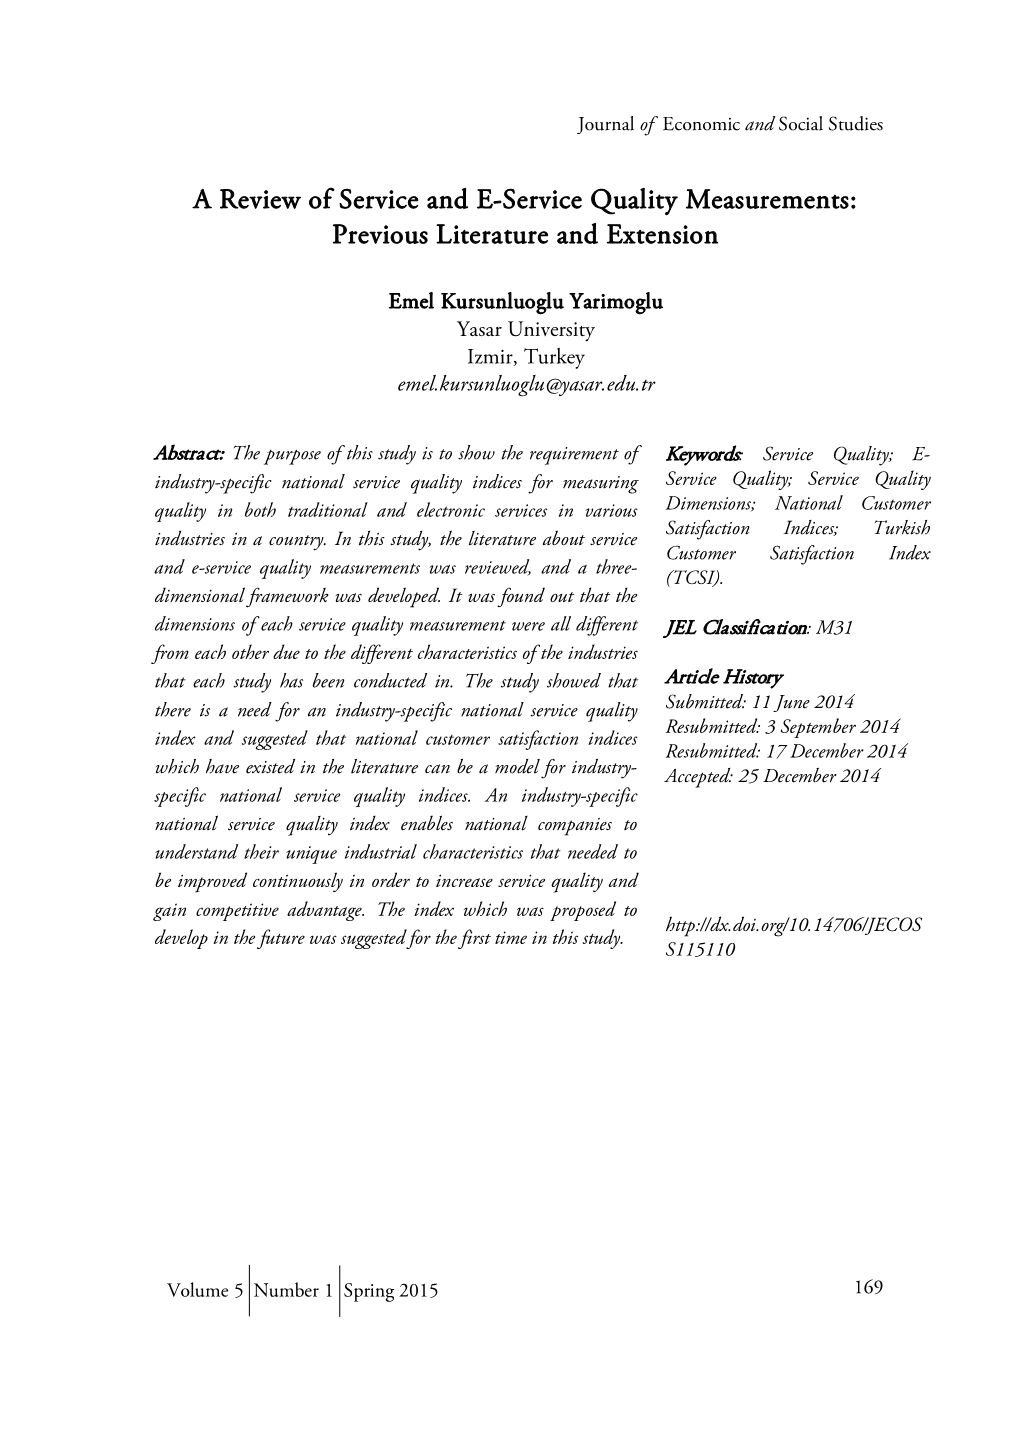 A Review of Service and E-Service Quality Measurements: Previous Literature and Extension